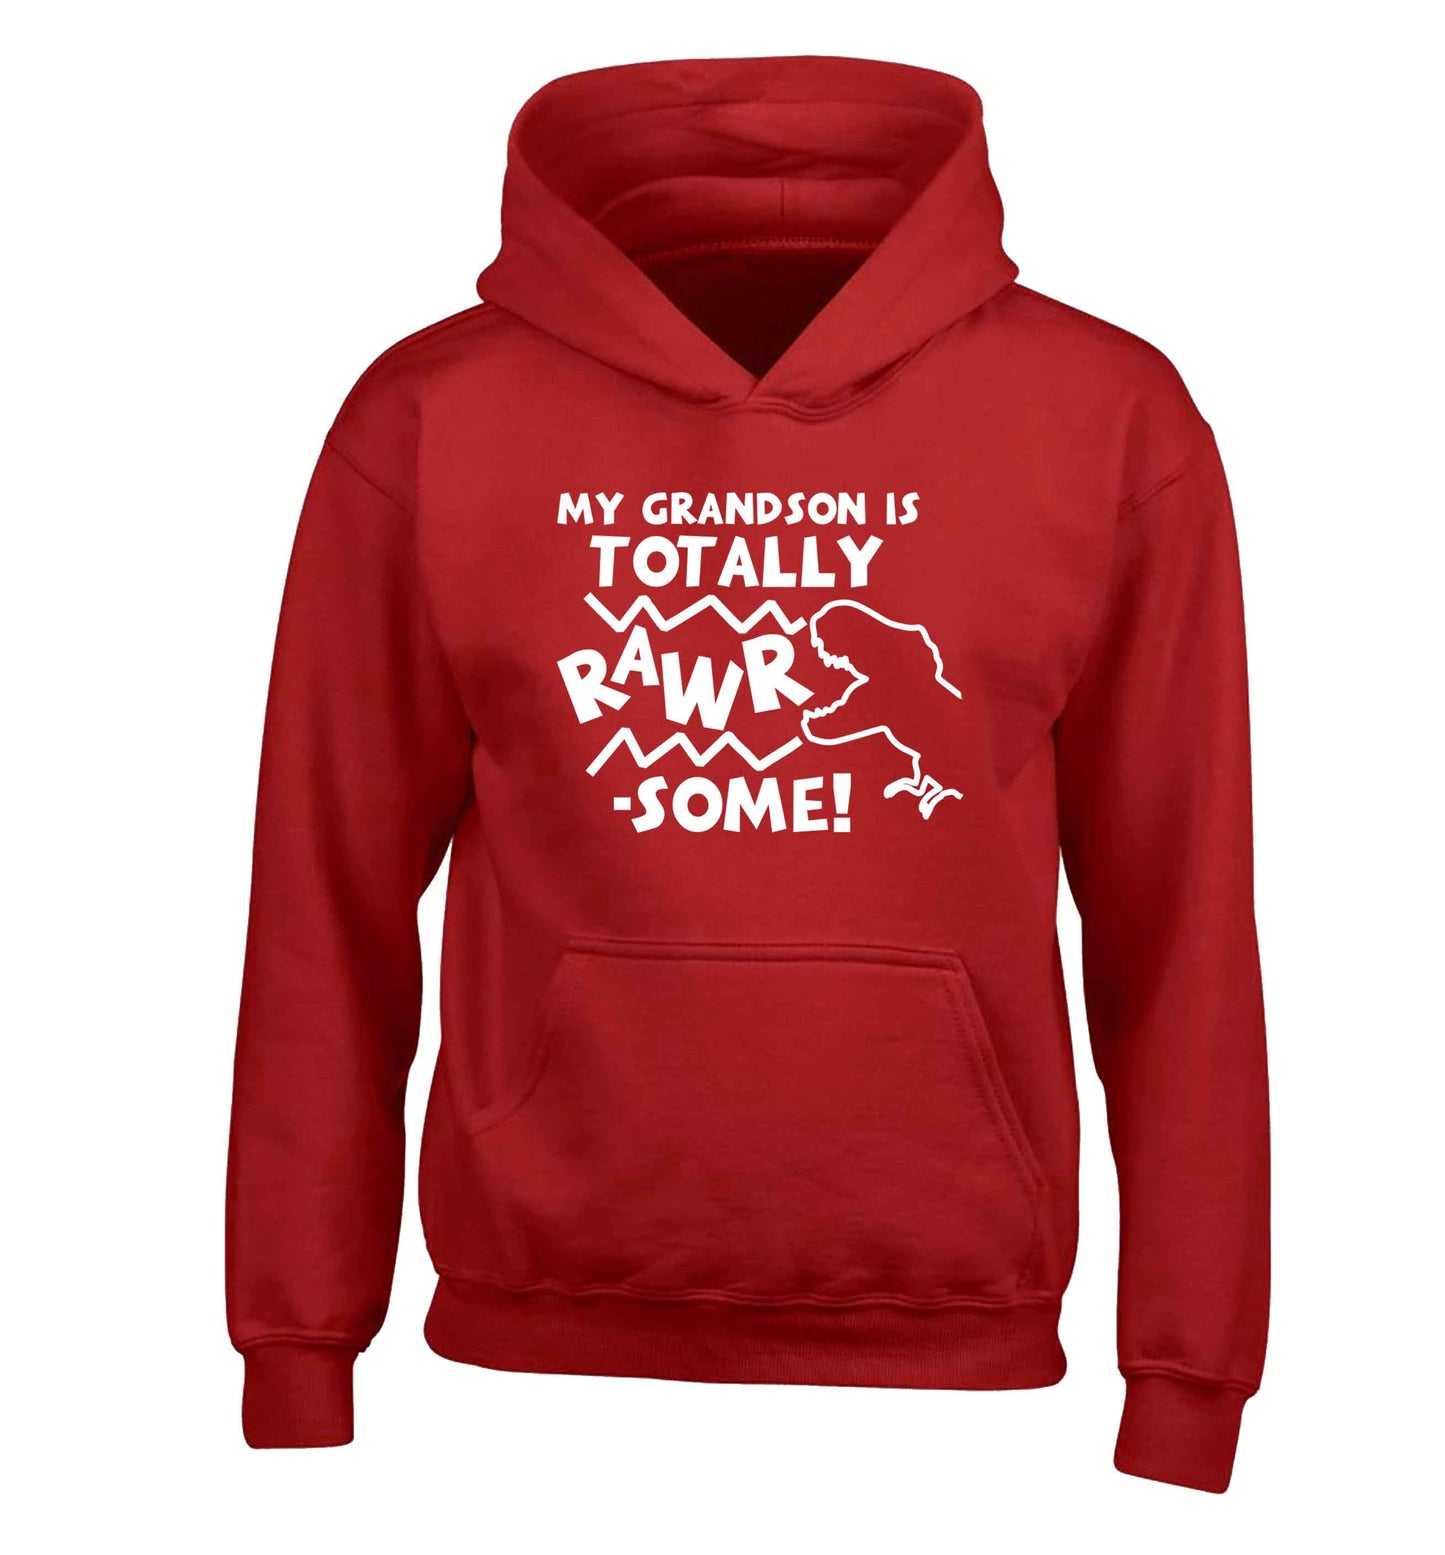 My grandson is totally rawrsome children's red hoodie 12-13 Years